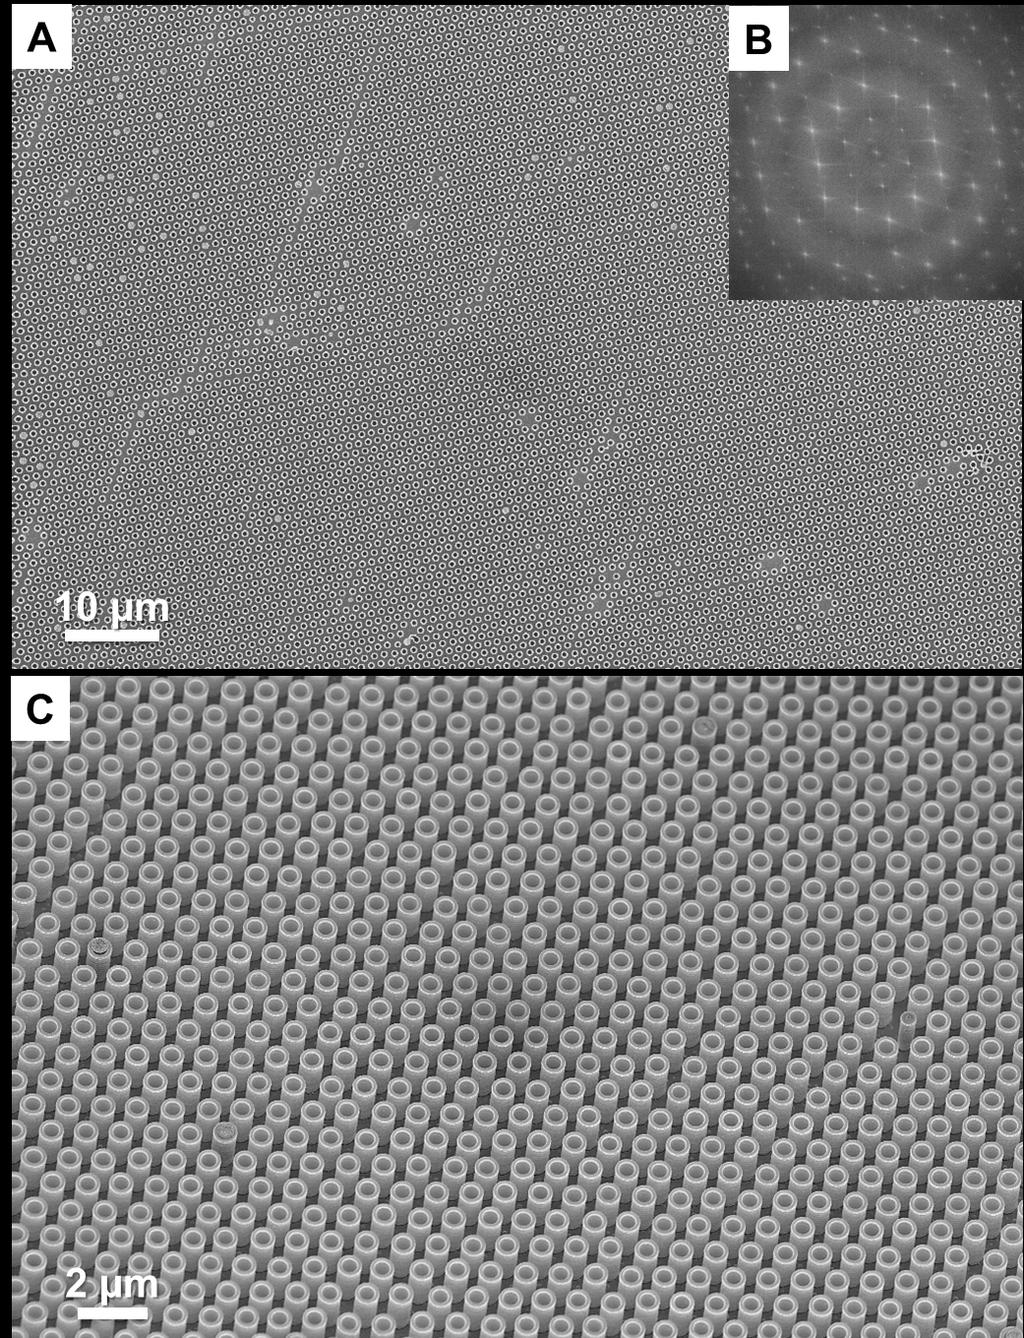 Figure S2. (A) A typical scanning electron microscope (SEM) image of a large area of the silicon nanotube arrays.